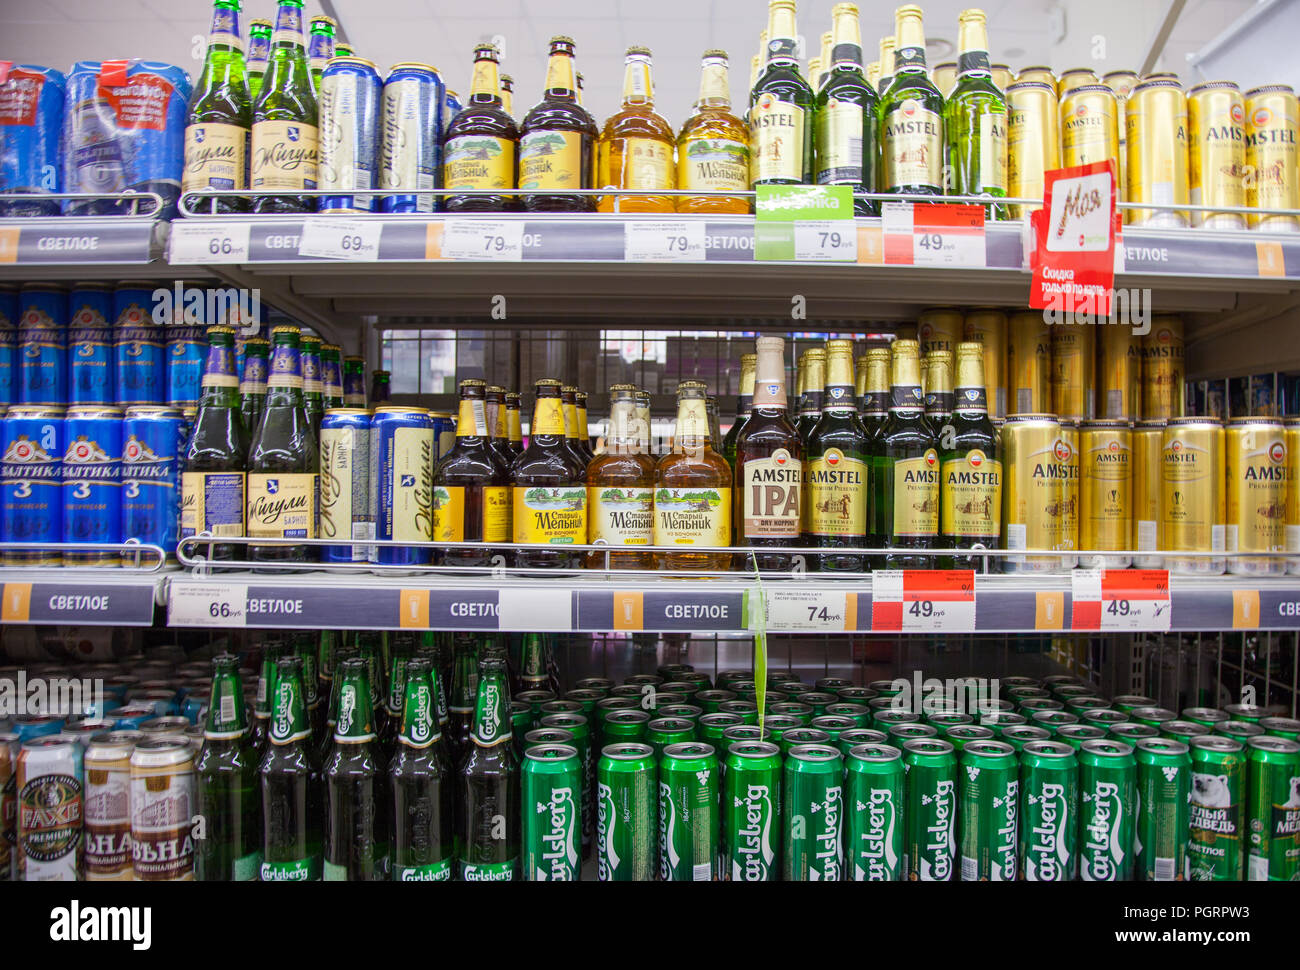 Kaliningrad, Russia - August 25, 2018: Shelves of supermarket with beer. Stock Photo